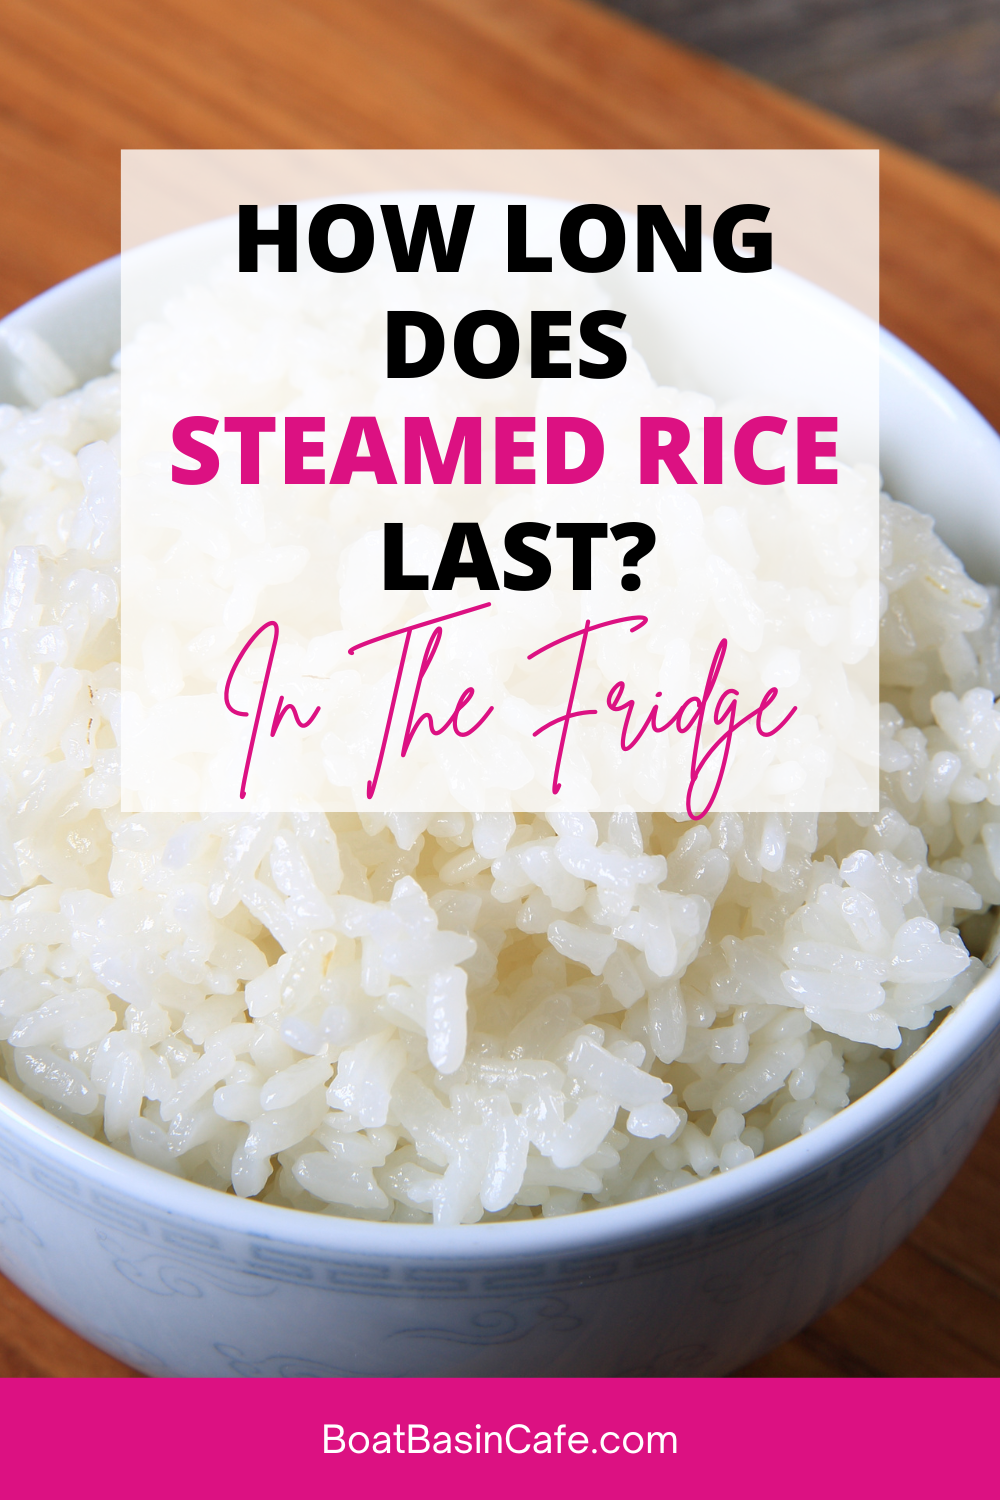 How Long Does Steamed Rice Last In The Fridge? 4 Or 7 Days?